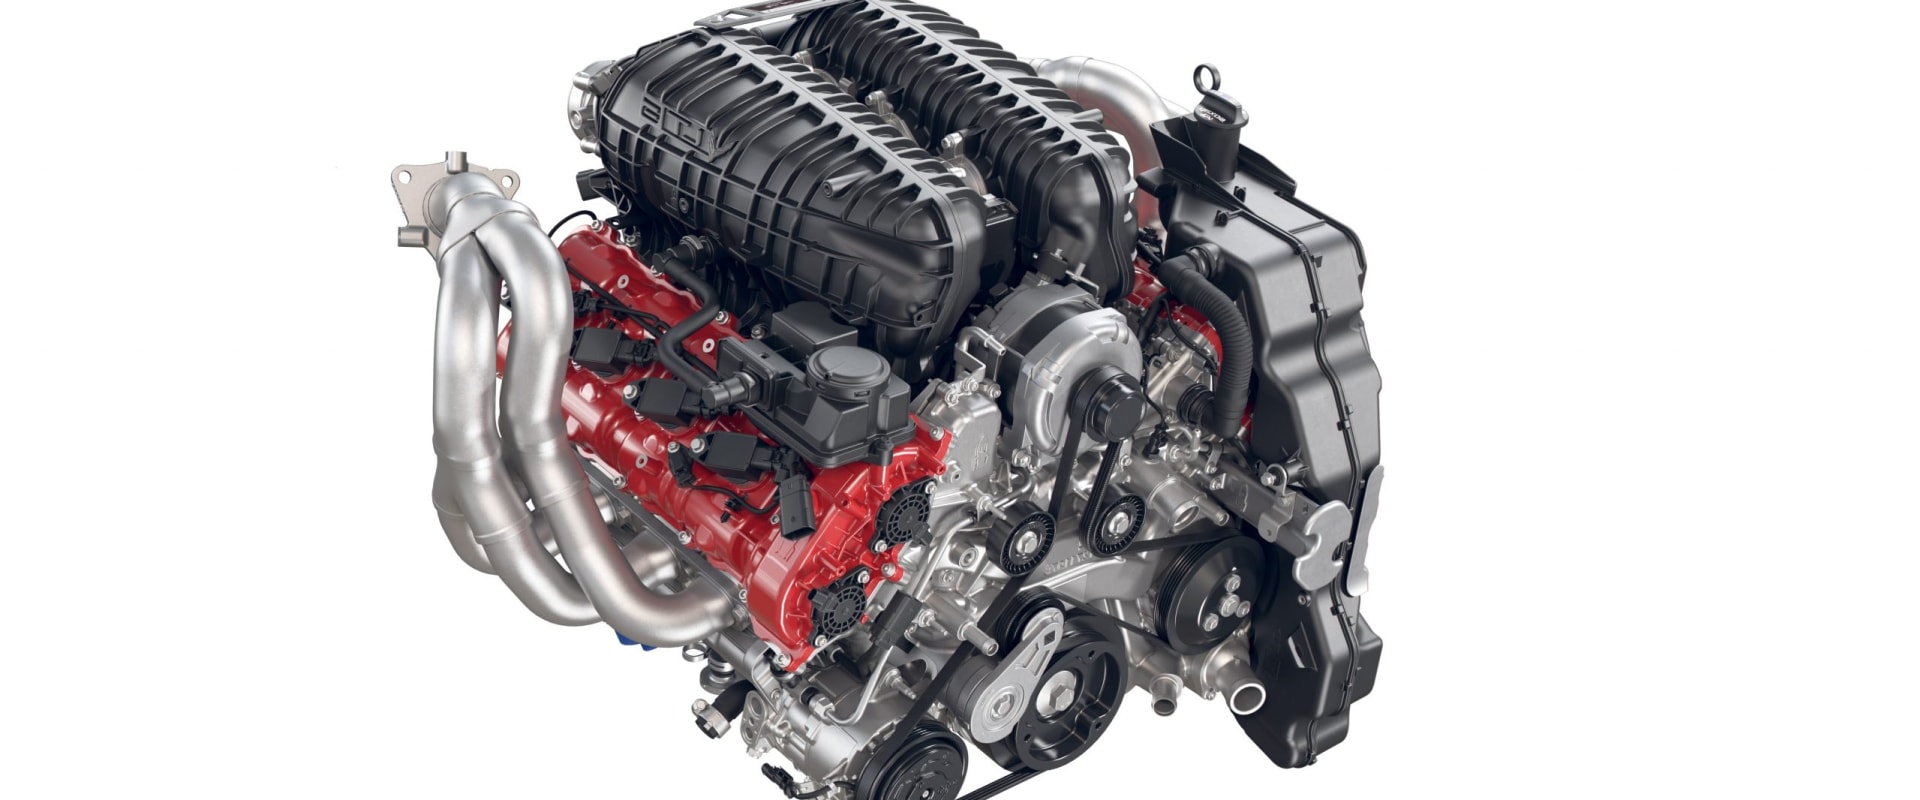 Exploring the Different Types of Engines and Their Horsepower